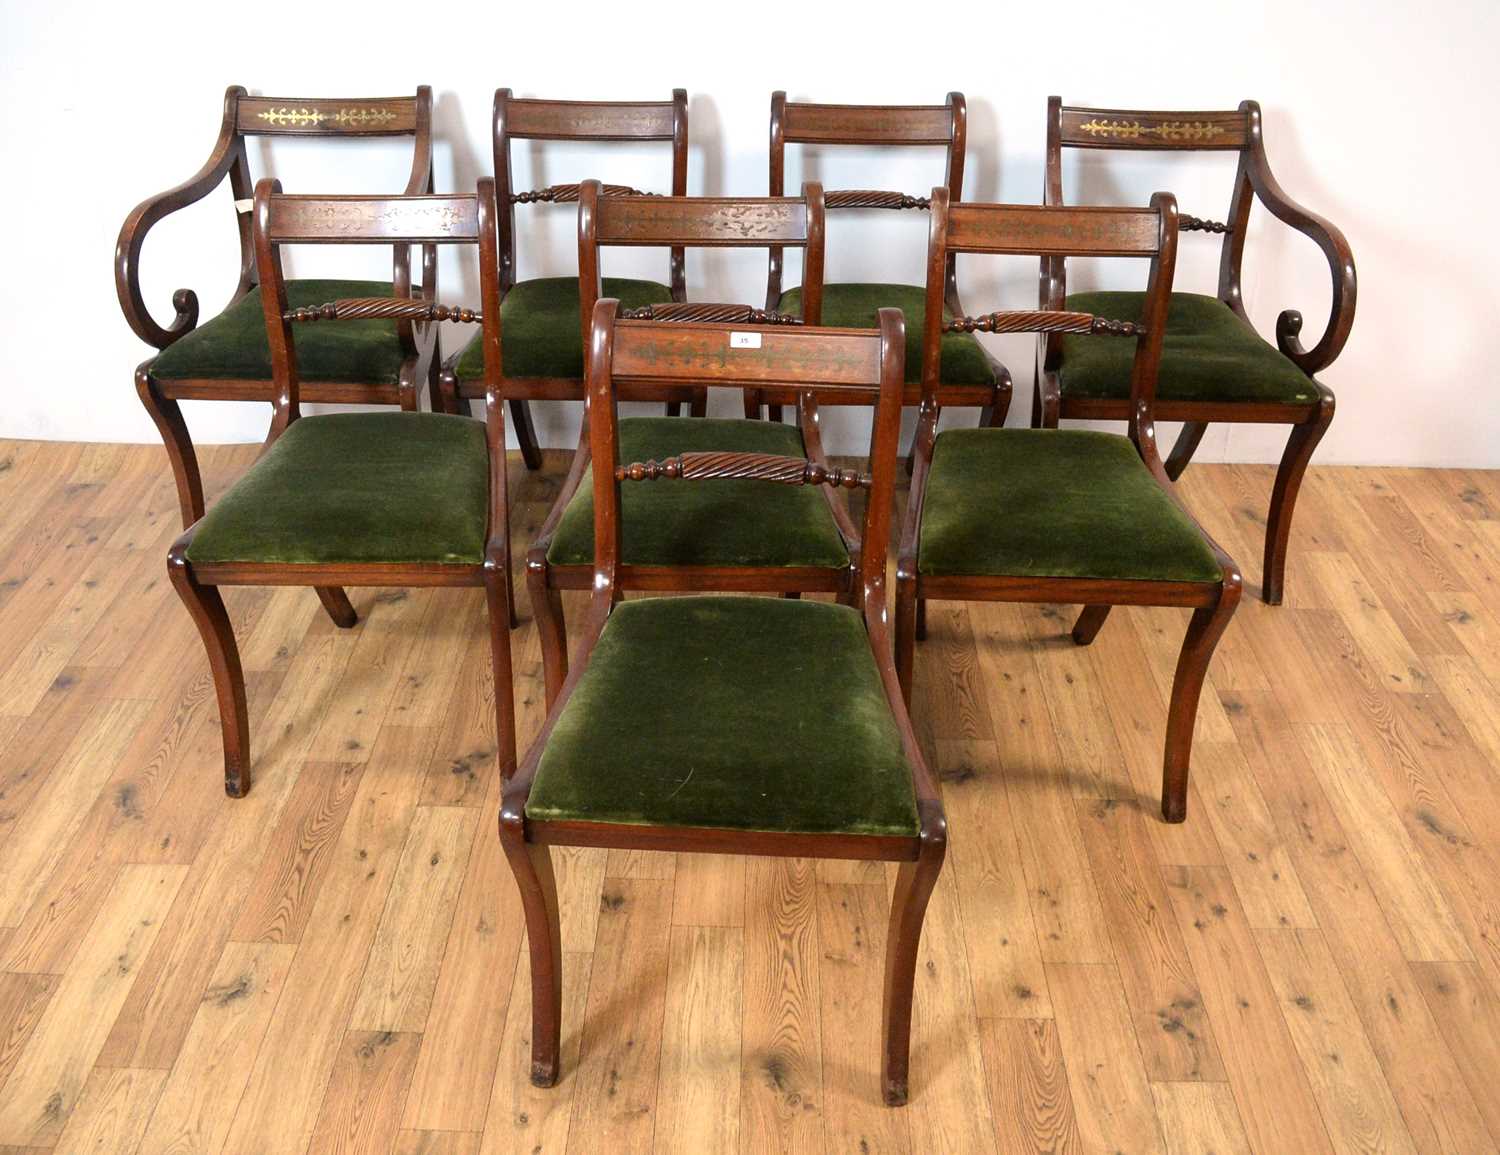 A set of 8 Regency Revival mahogany dining chairs